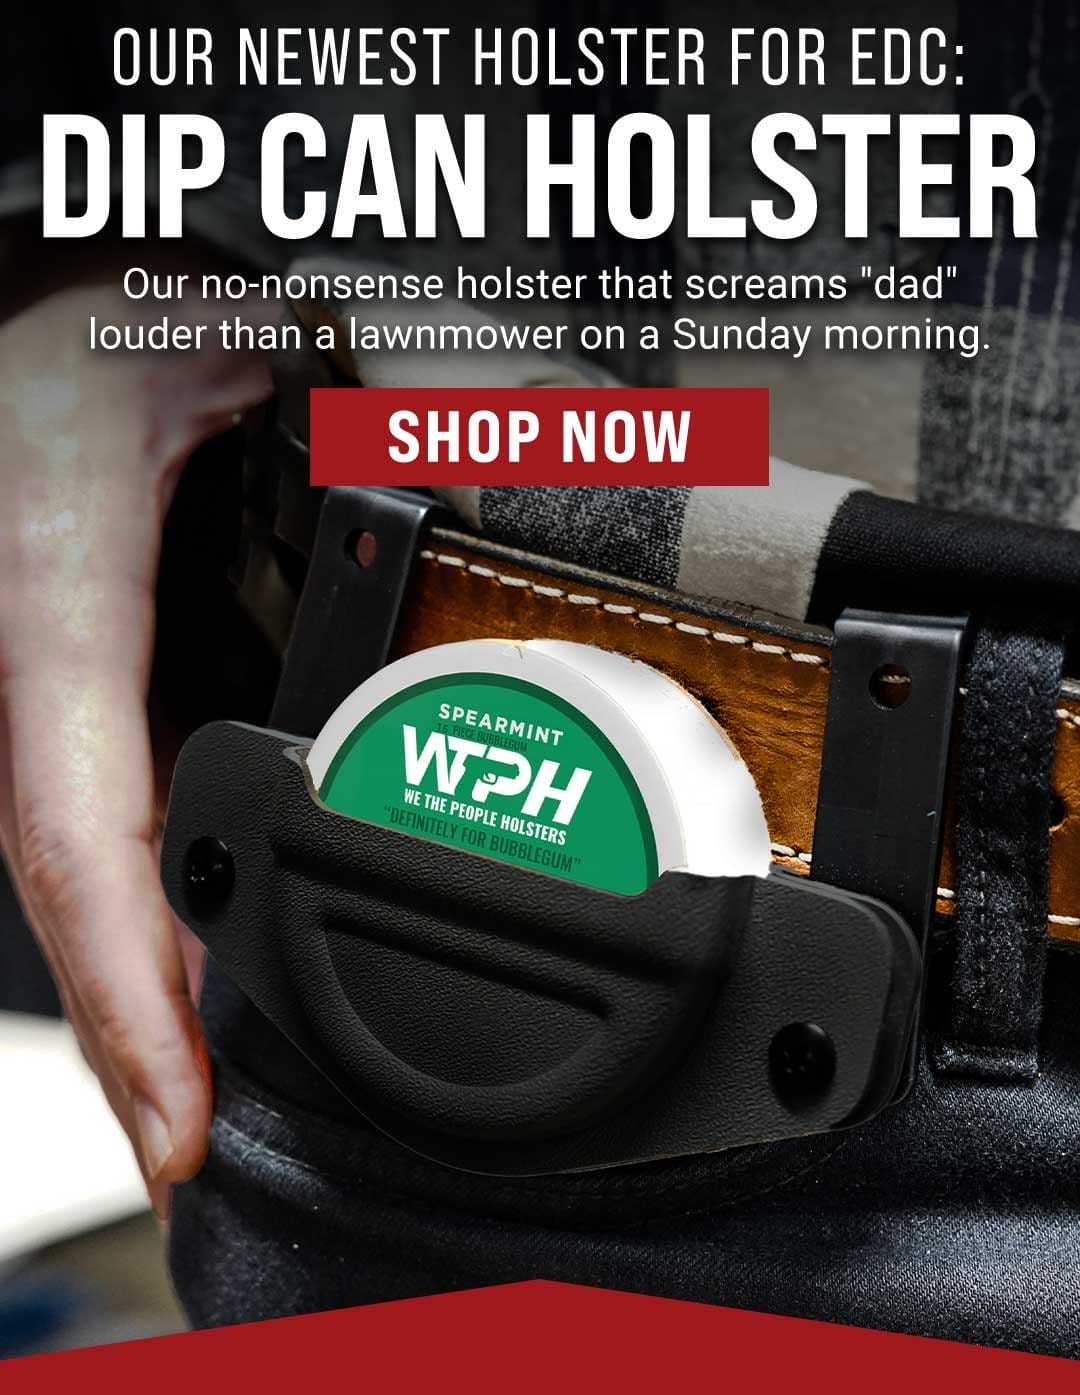 Dip Can Holster now available